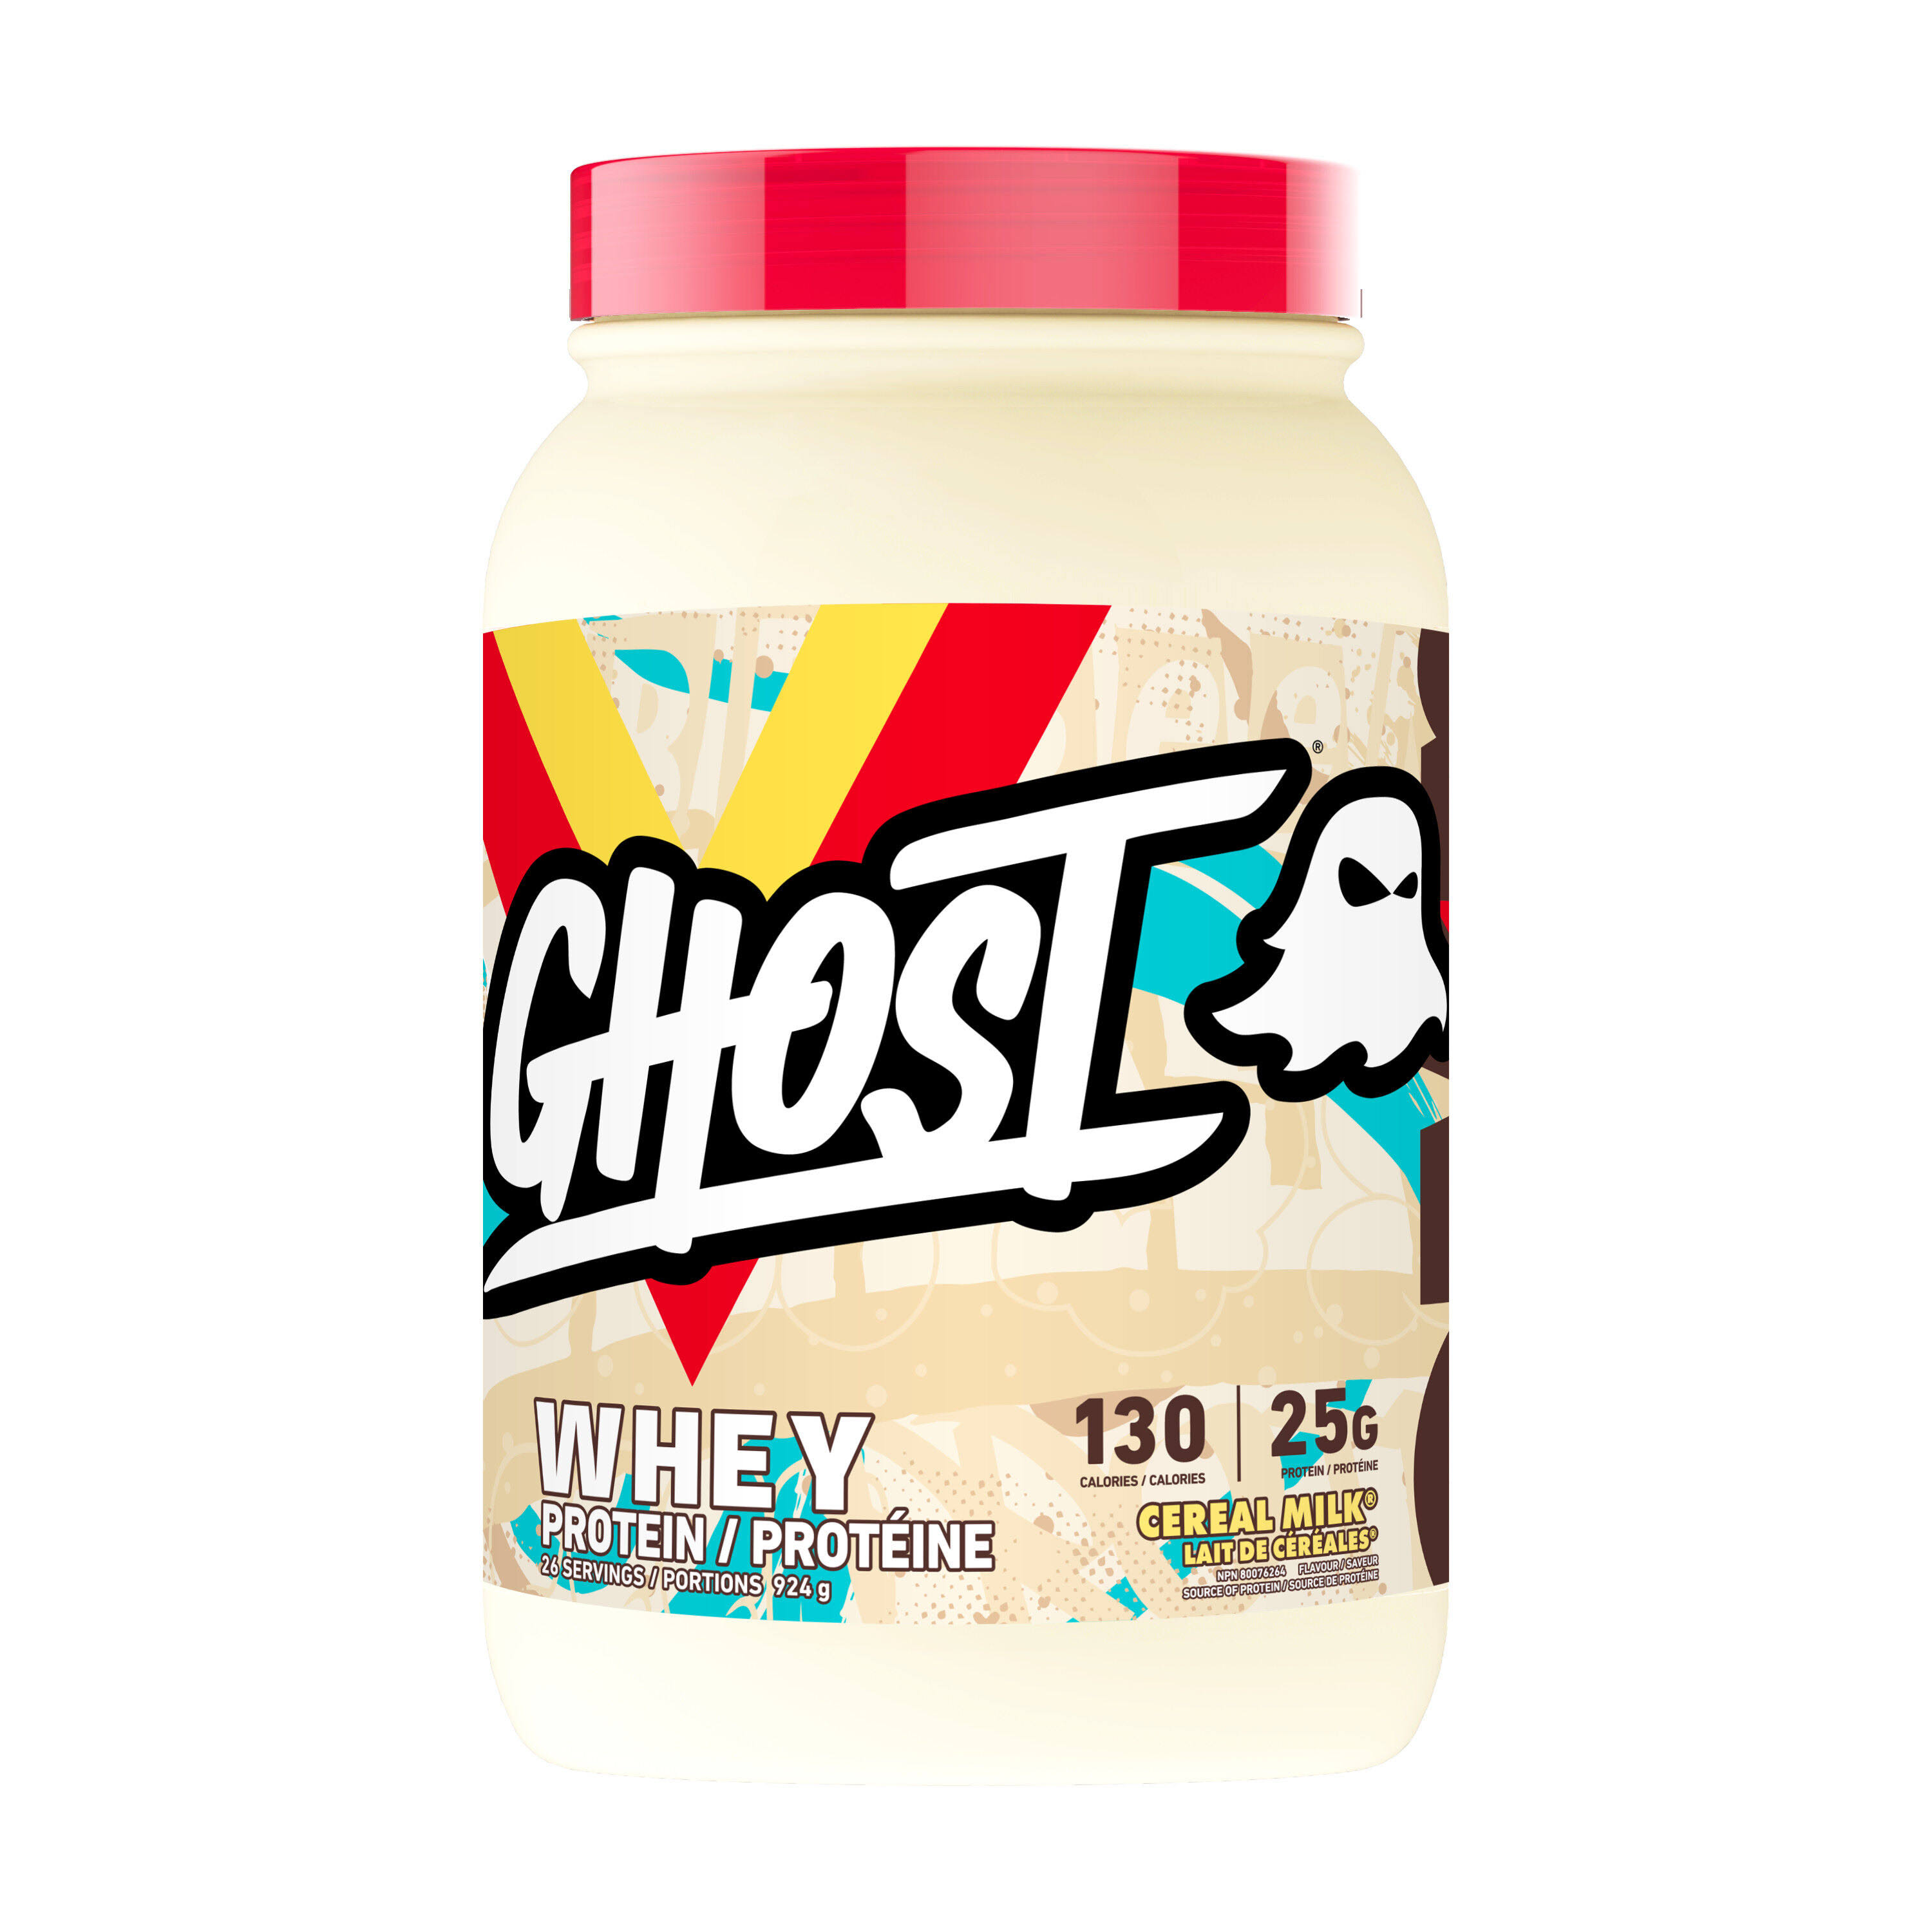 GHOST - WHEY PROTEIN Cereal Milk